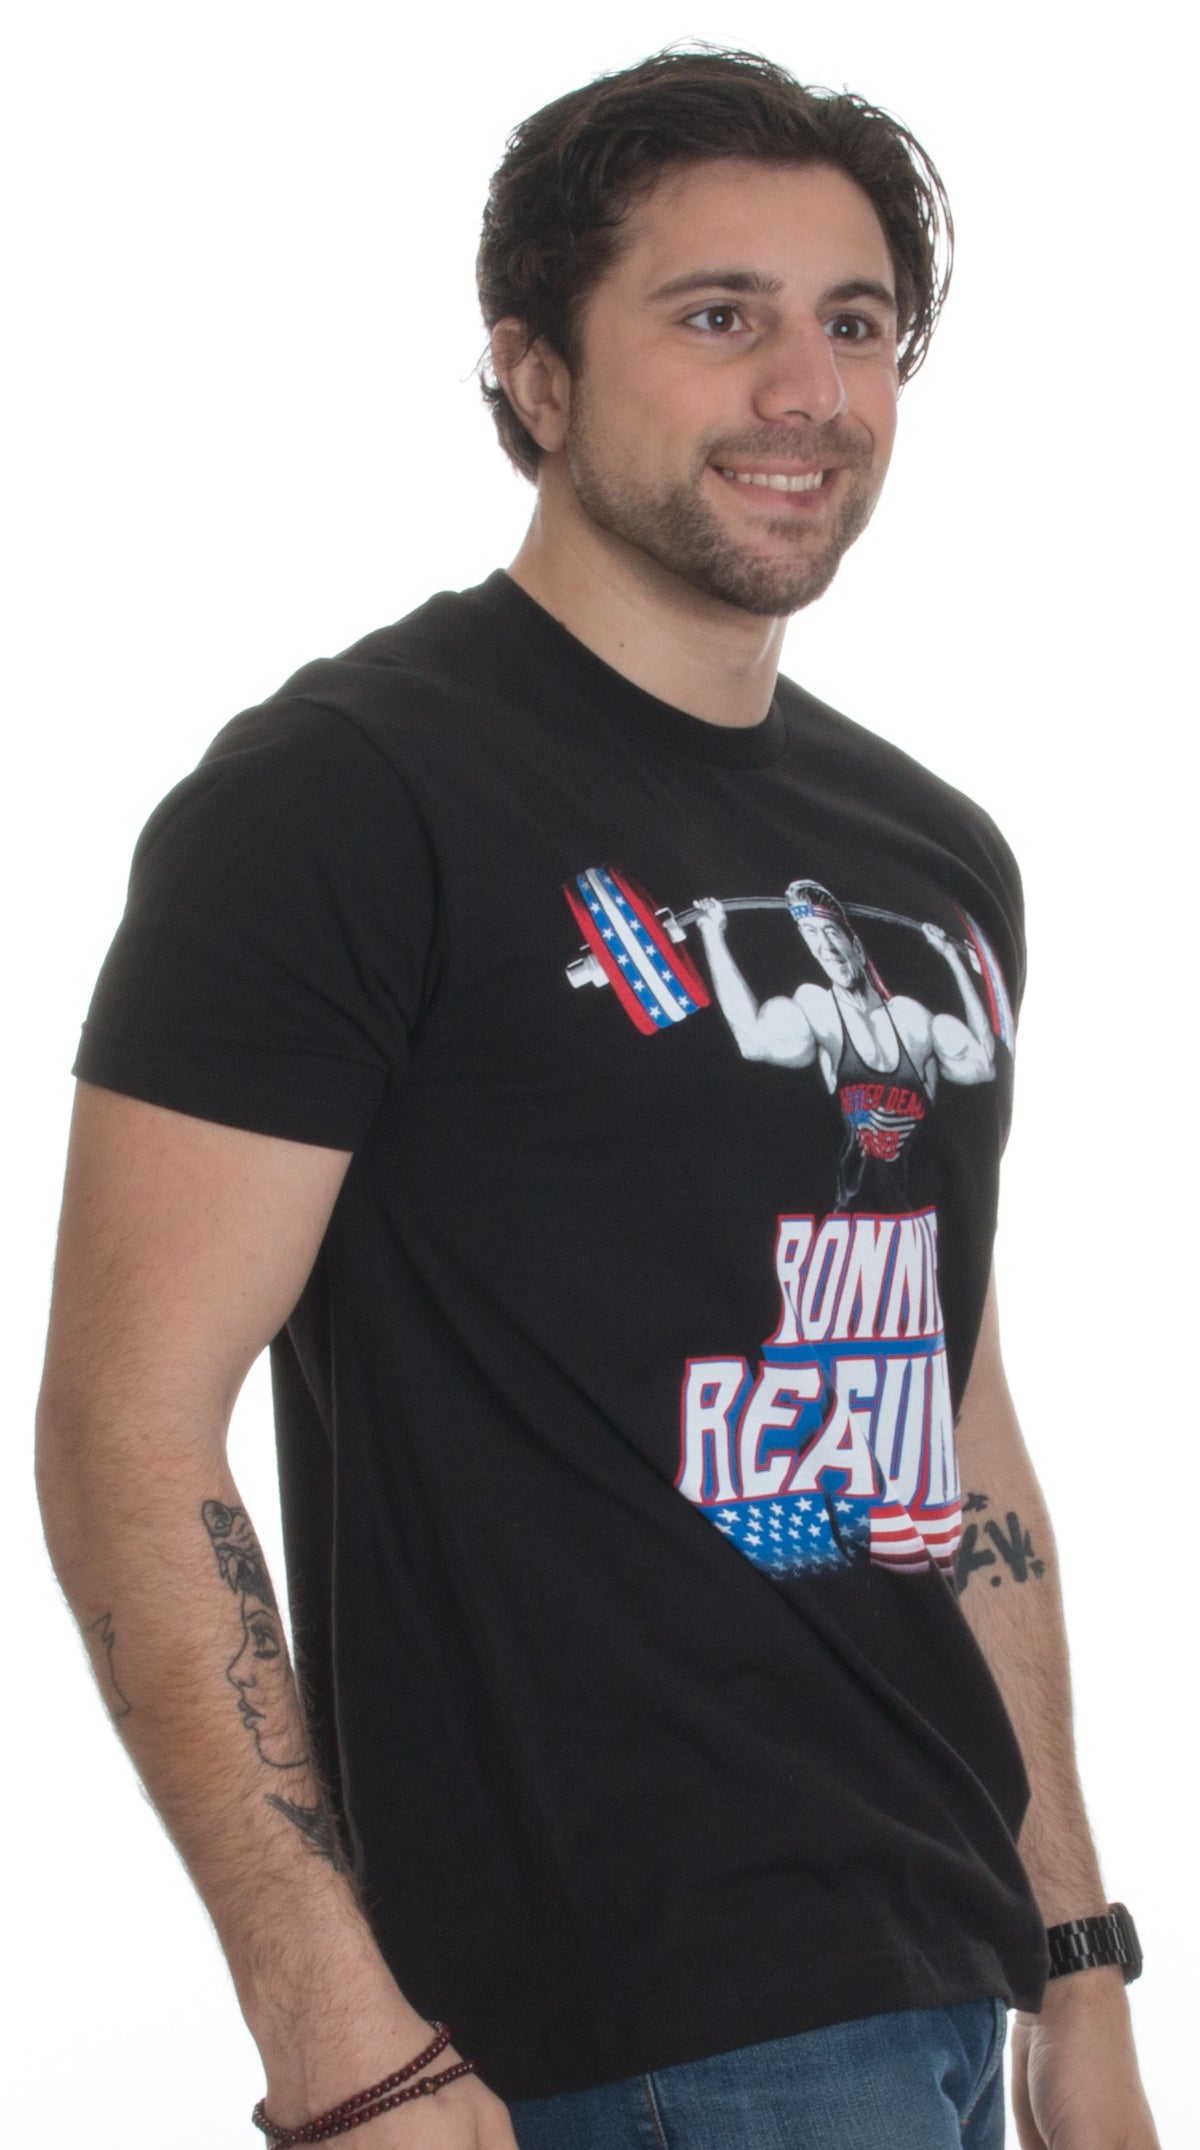 Ronnie ReaGUNS | Funny Muscle Weight Lifting Work Out Patriot Merica USA T-shirt - Men's/Unisex